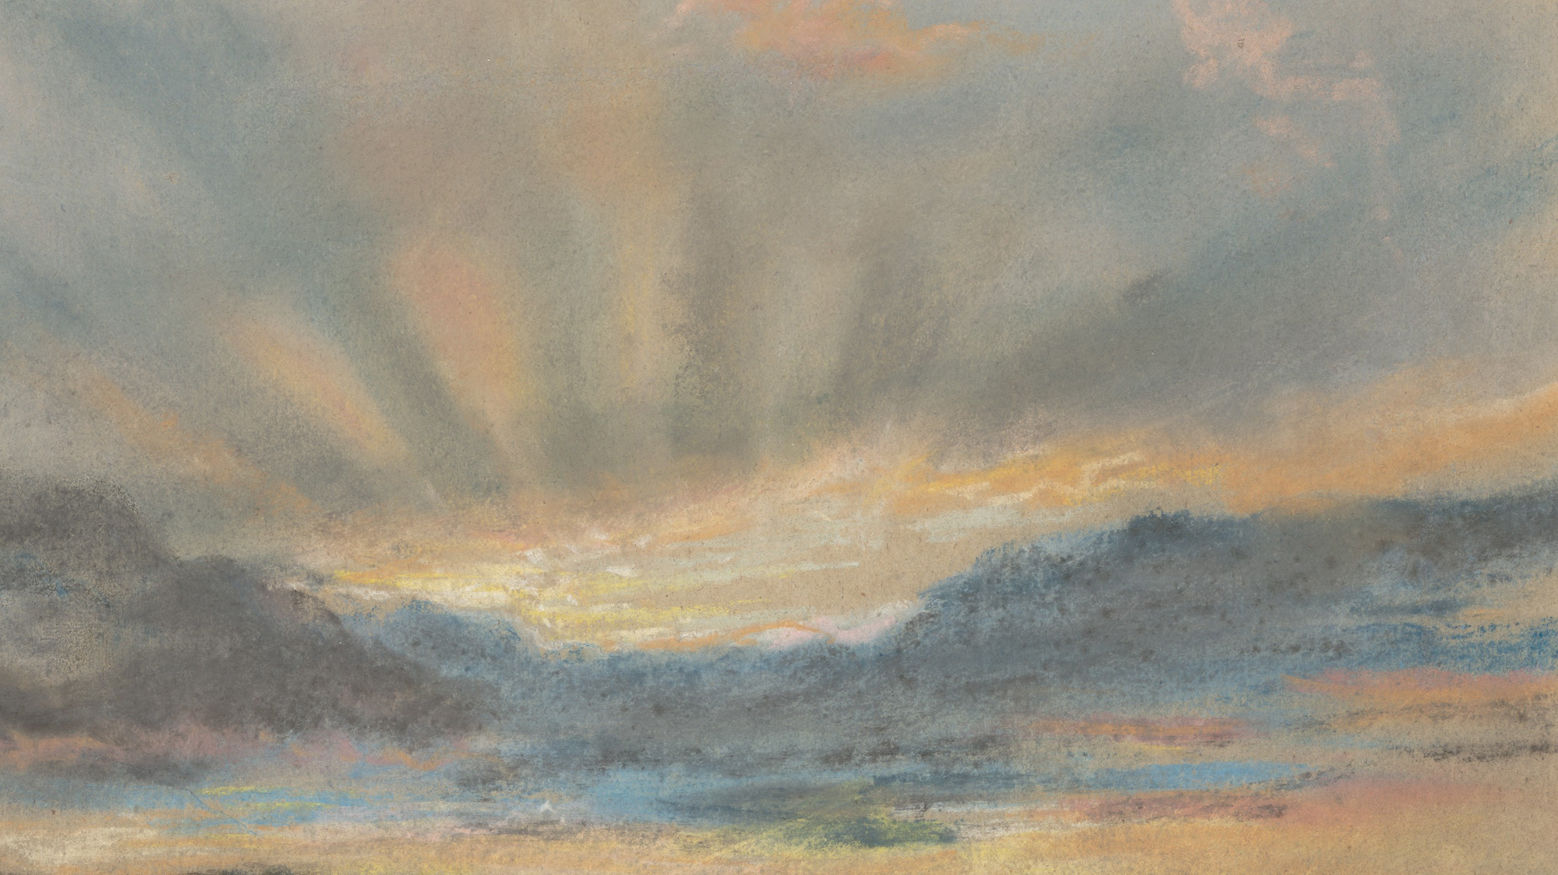 Detail from a colorful pastel drawing of a cloudy sunset.